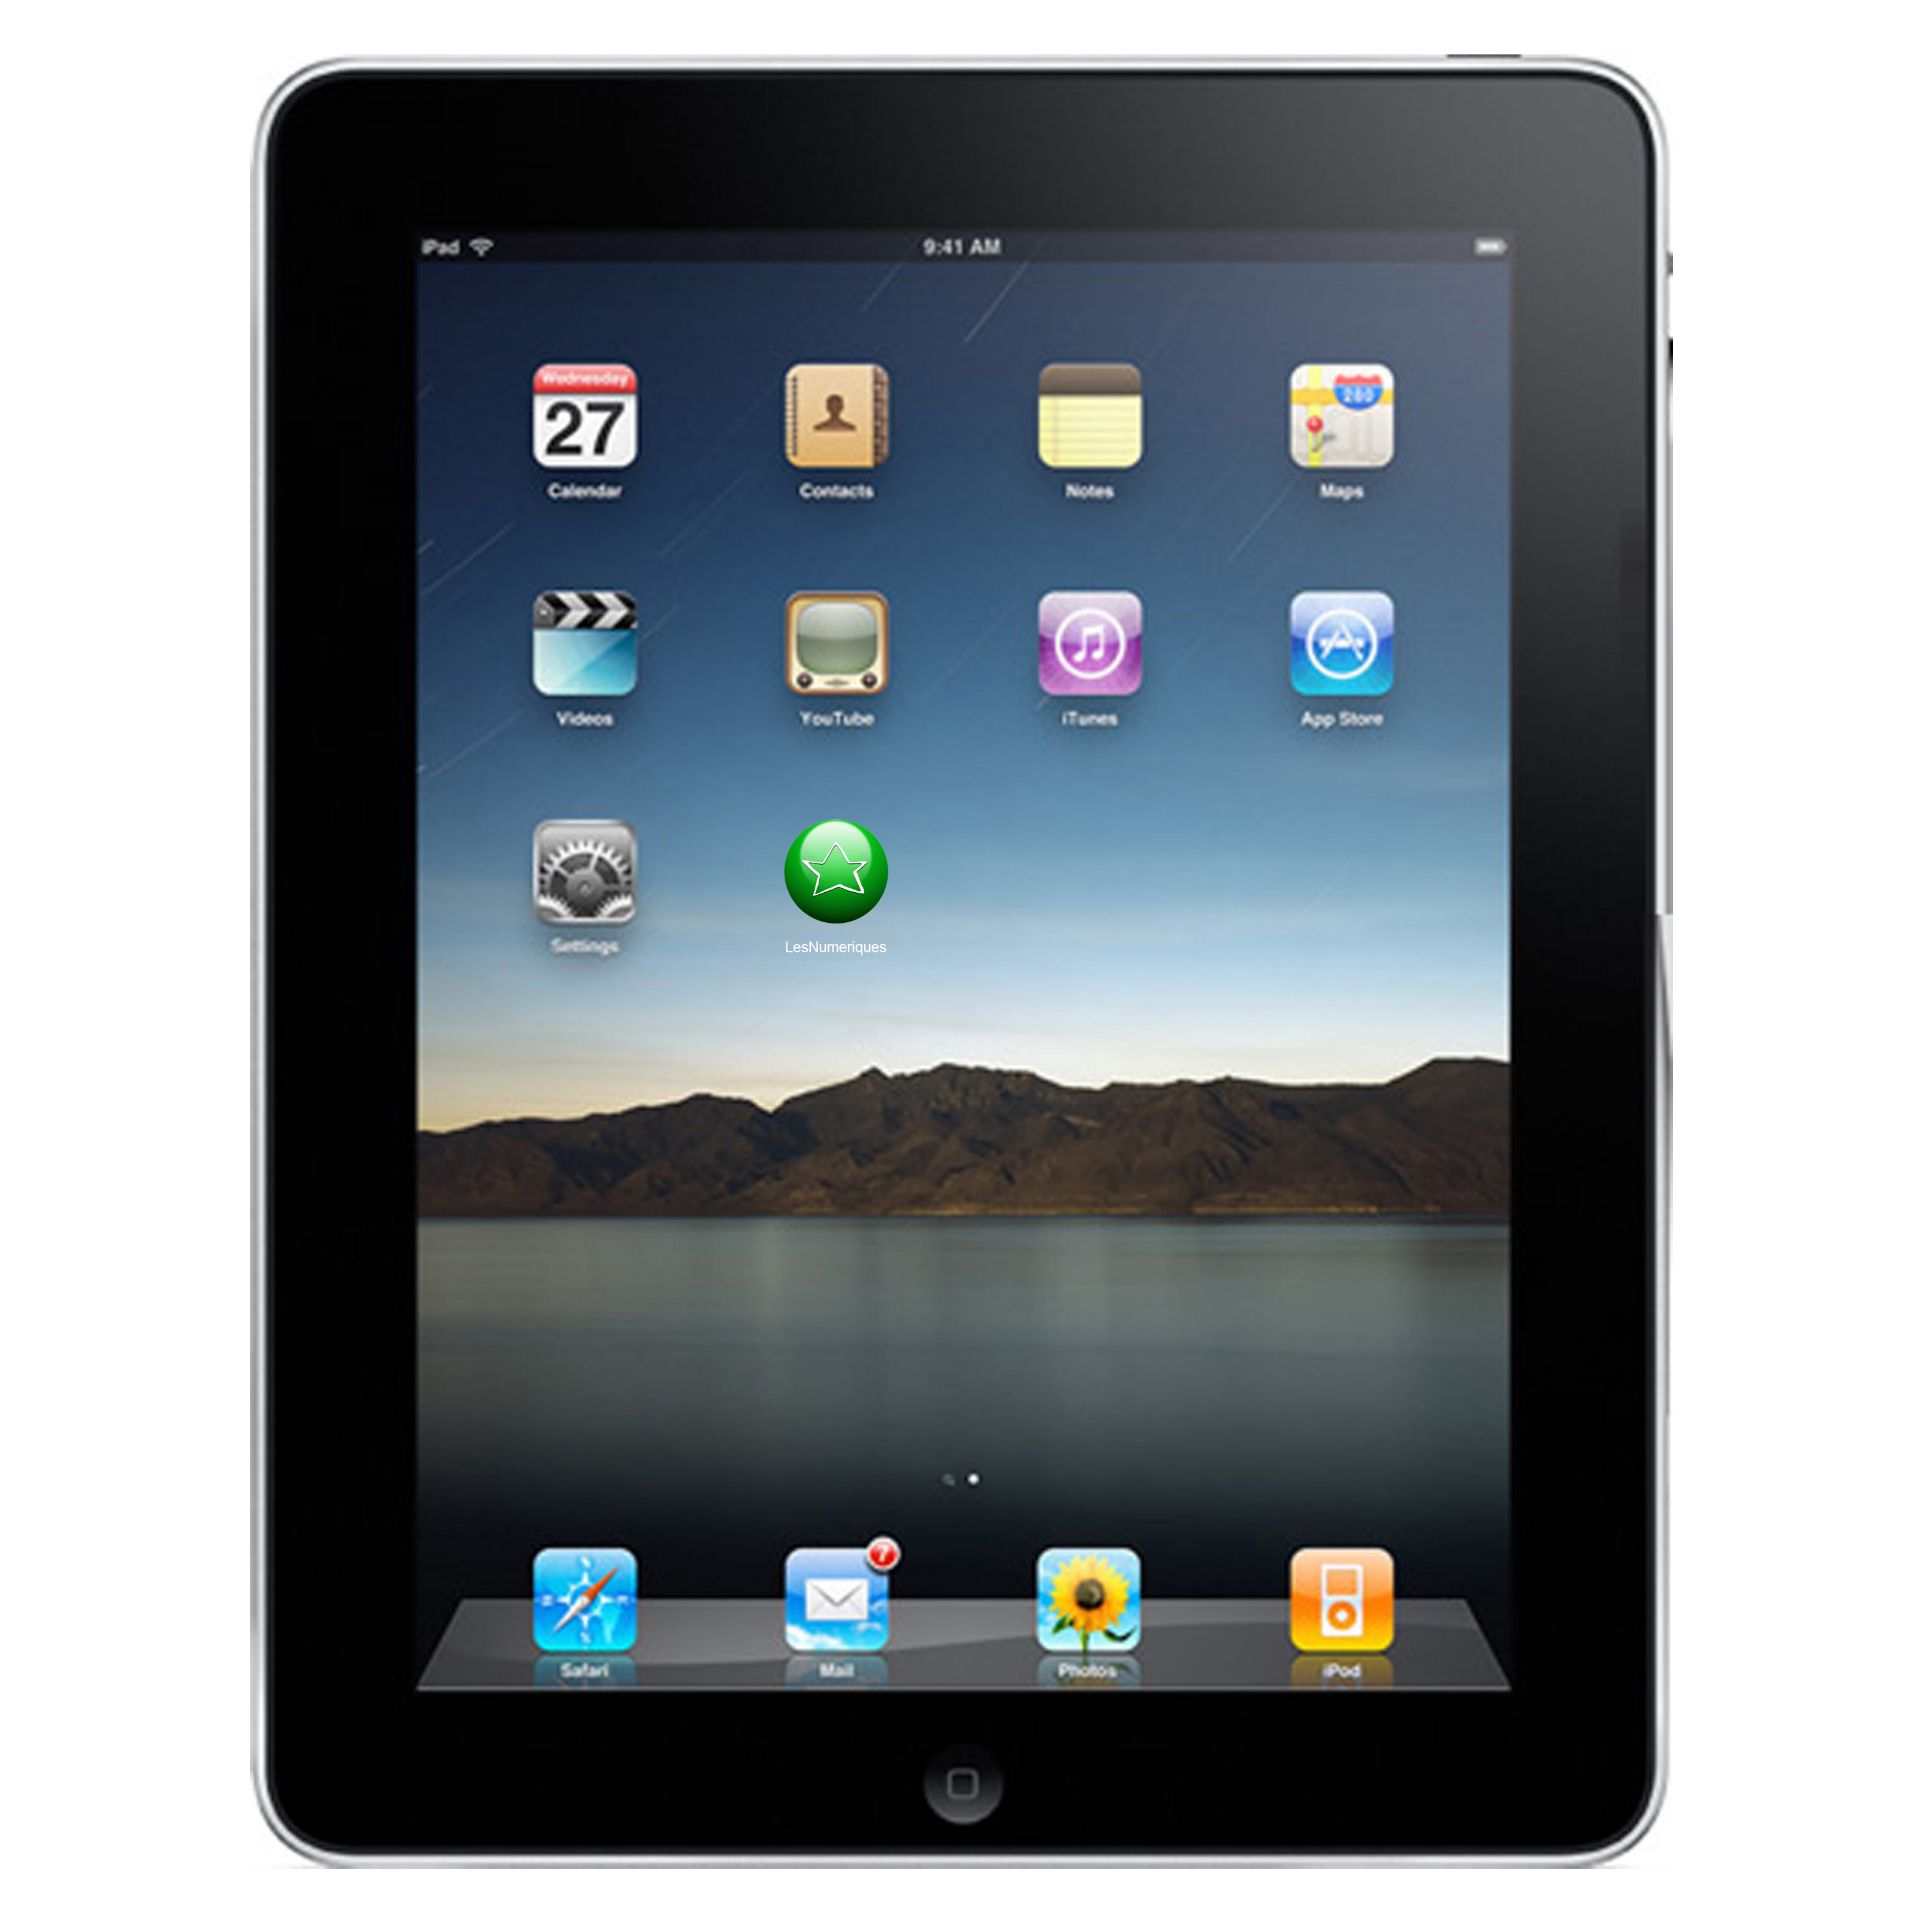 V  Grade B iPad 4 16Gb Black With Two Cameras/Retina Display With Charger In Original Box -